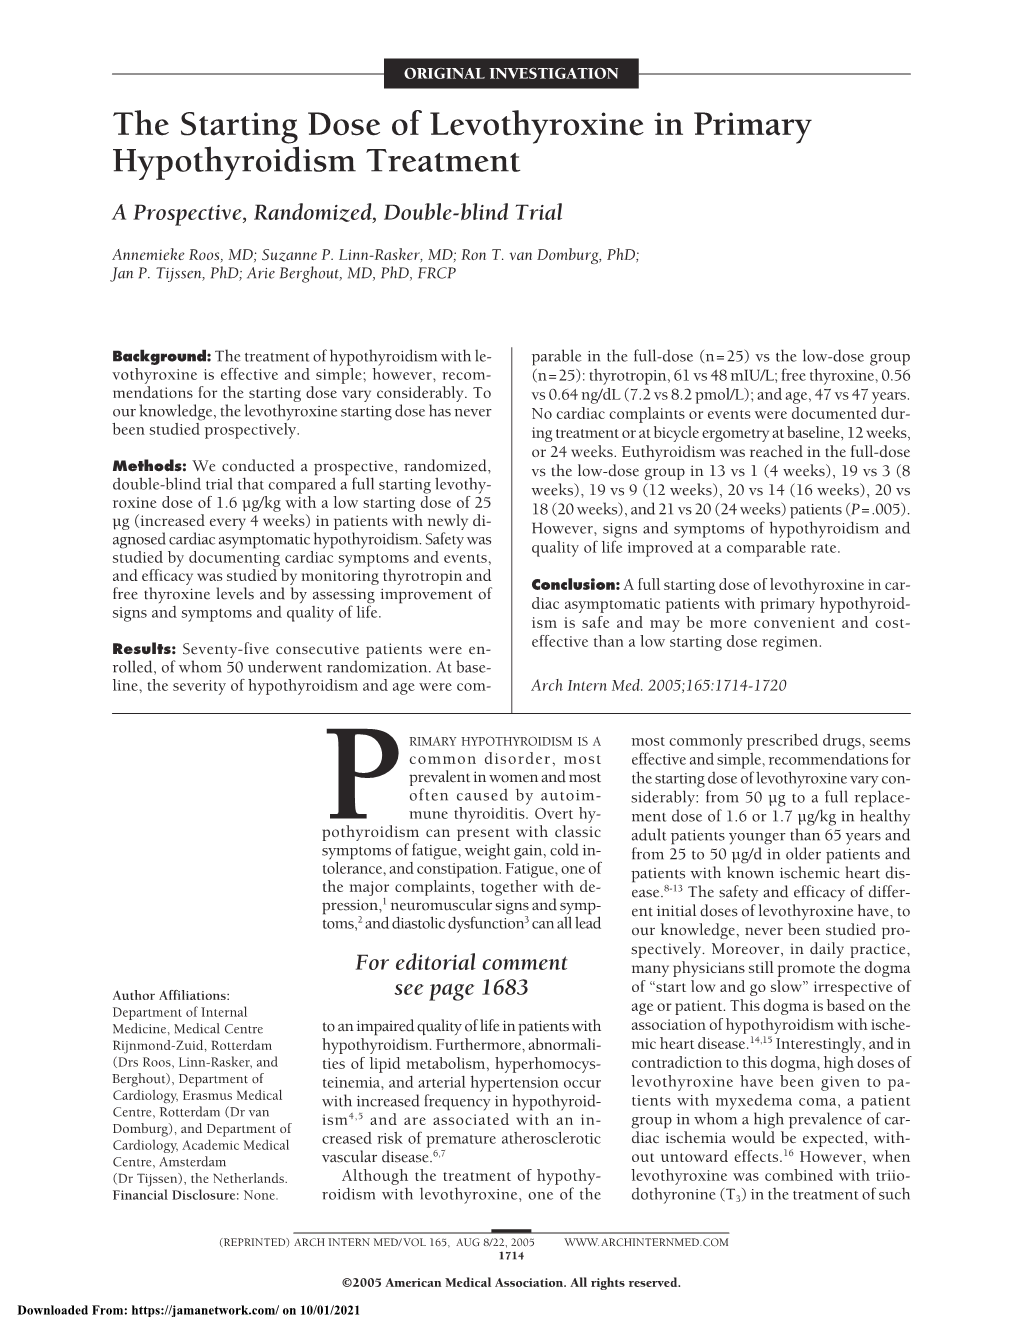 The Starting Dose of Levothyroxine in Primary Hypothyroidism Treatment a Prospective, Randomized, Double-Blind Trial